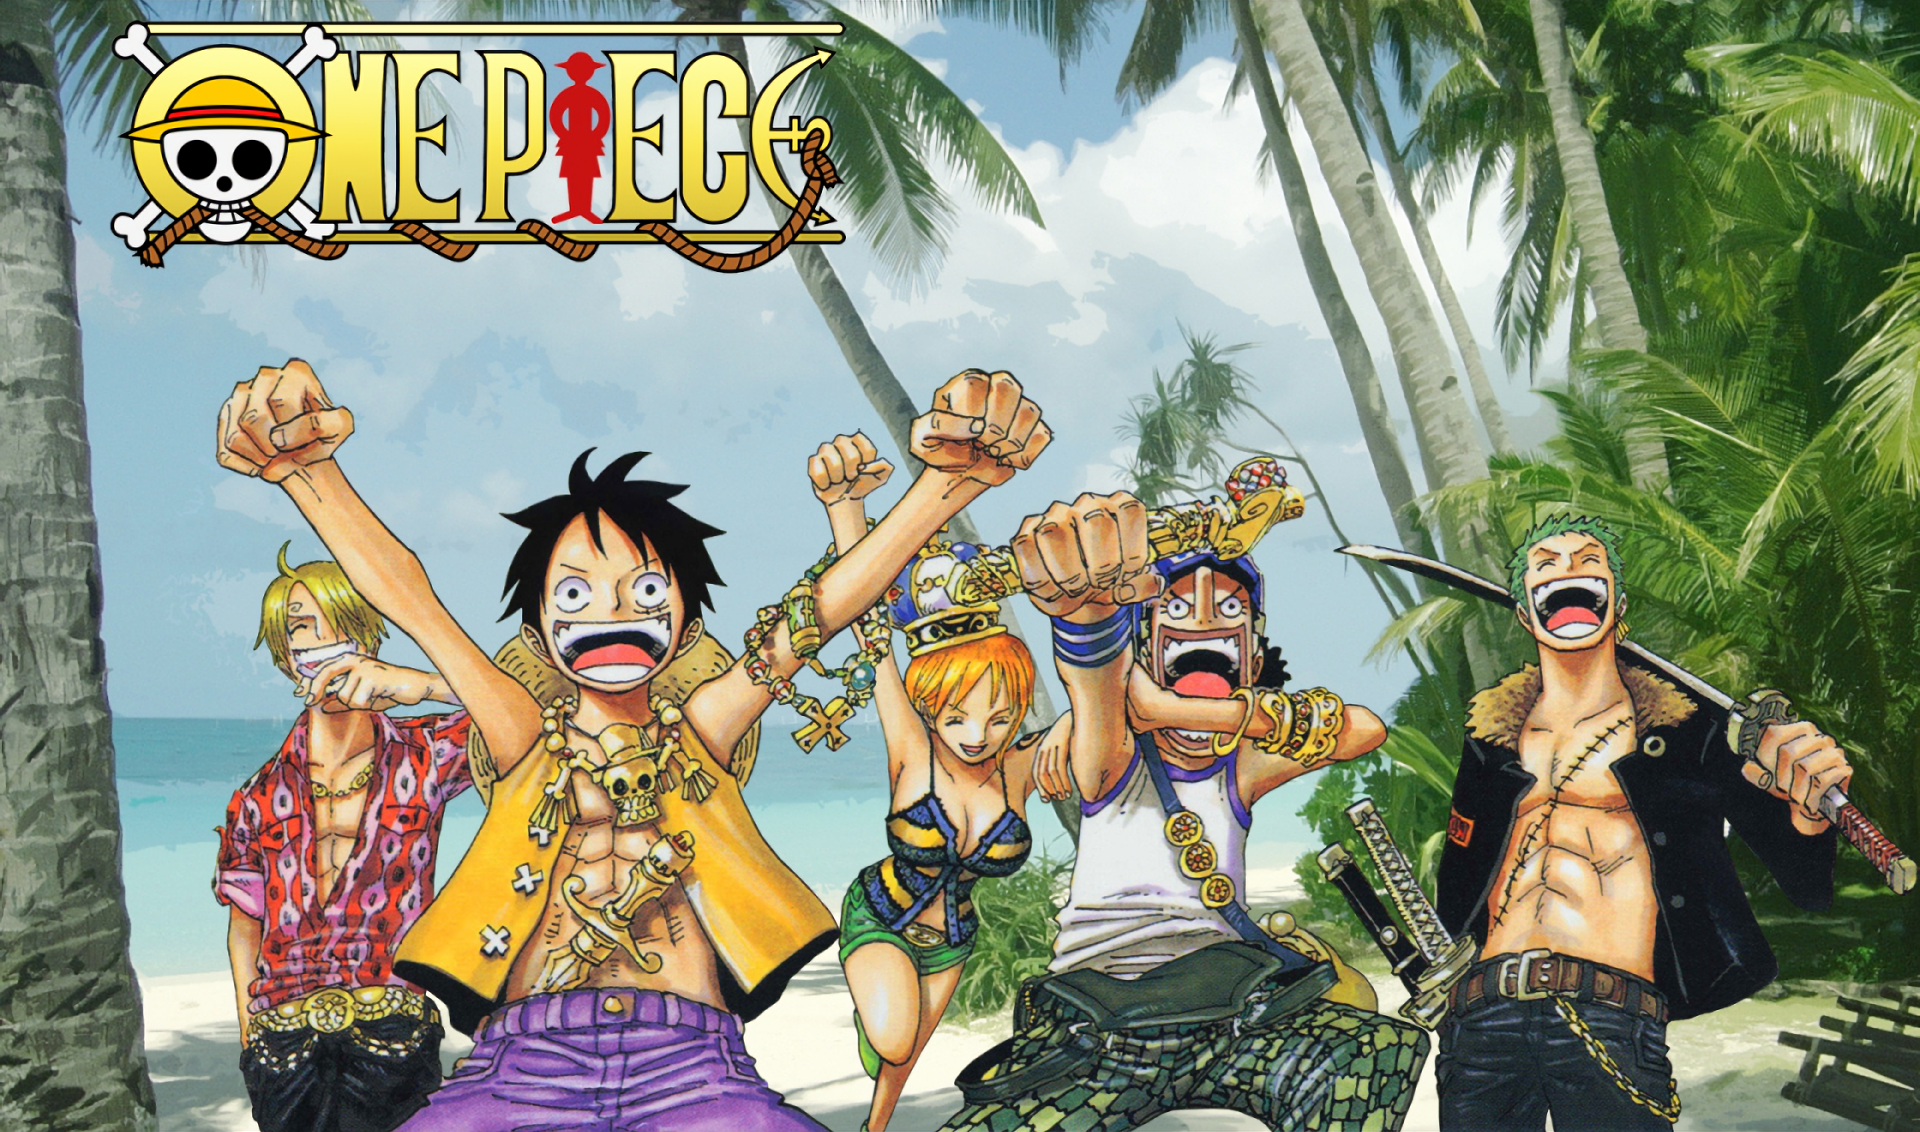 Anime characters from One Piece including Sanji, Luffy, Nami, Usopp, and Zoro.